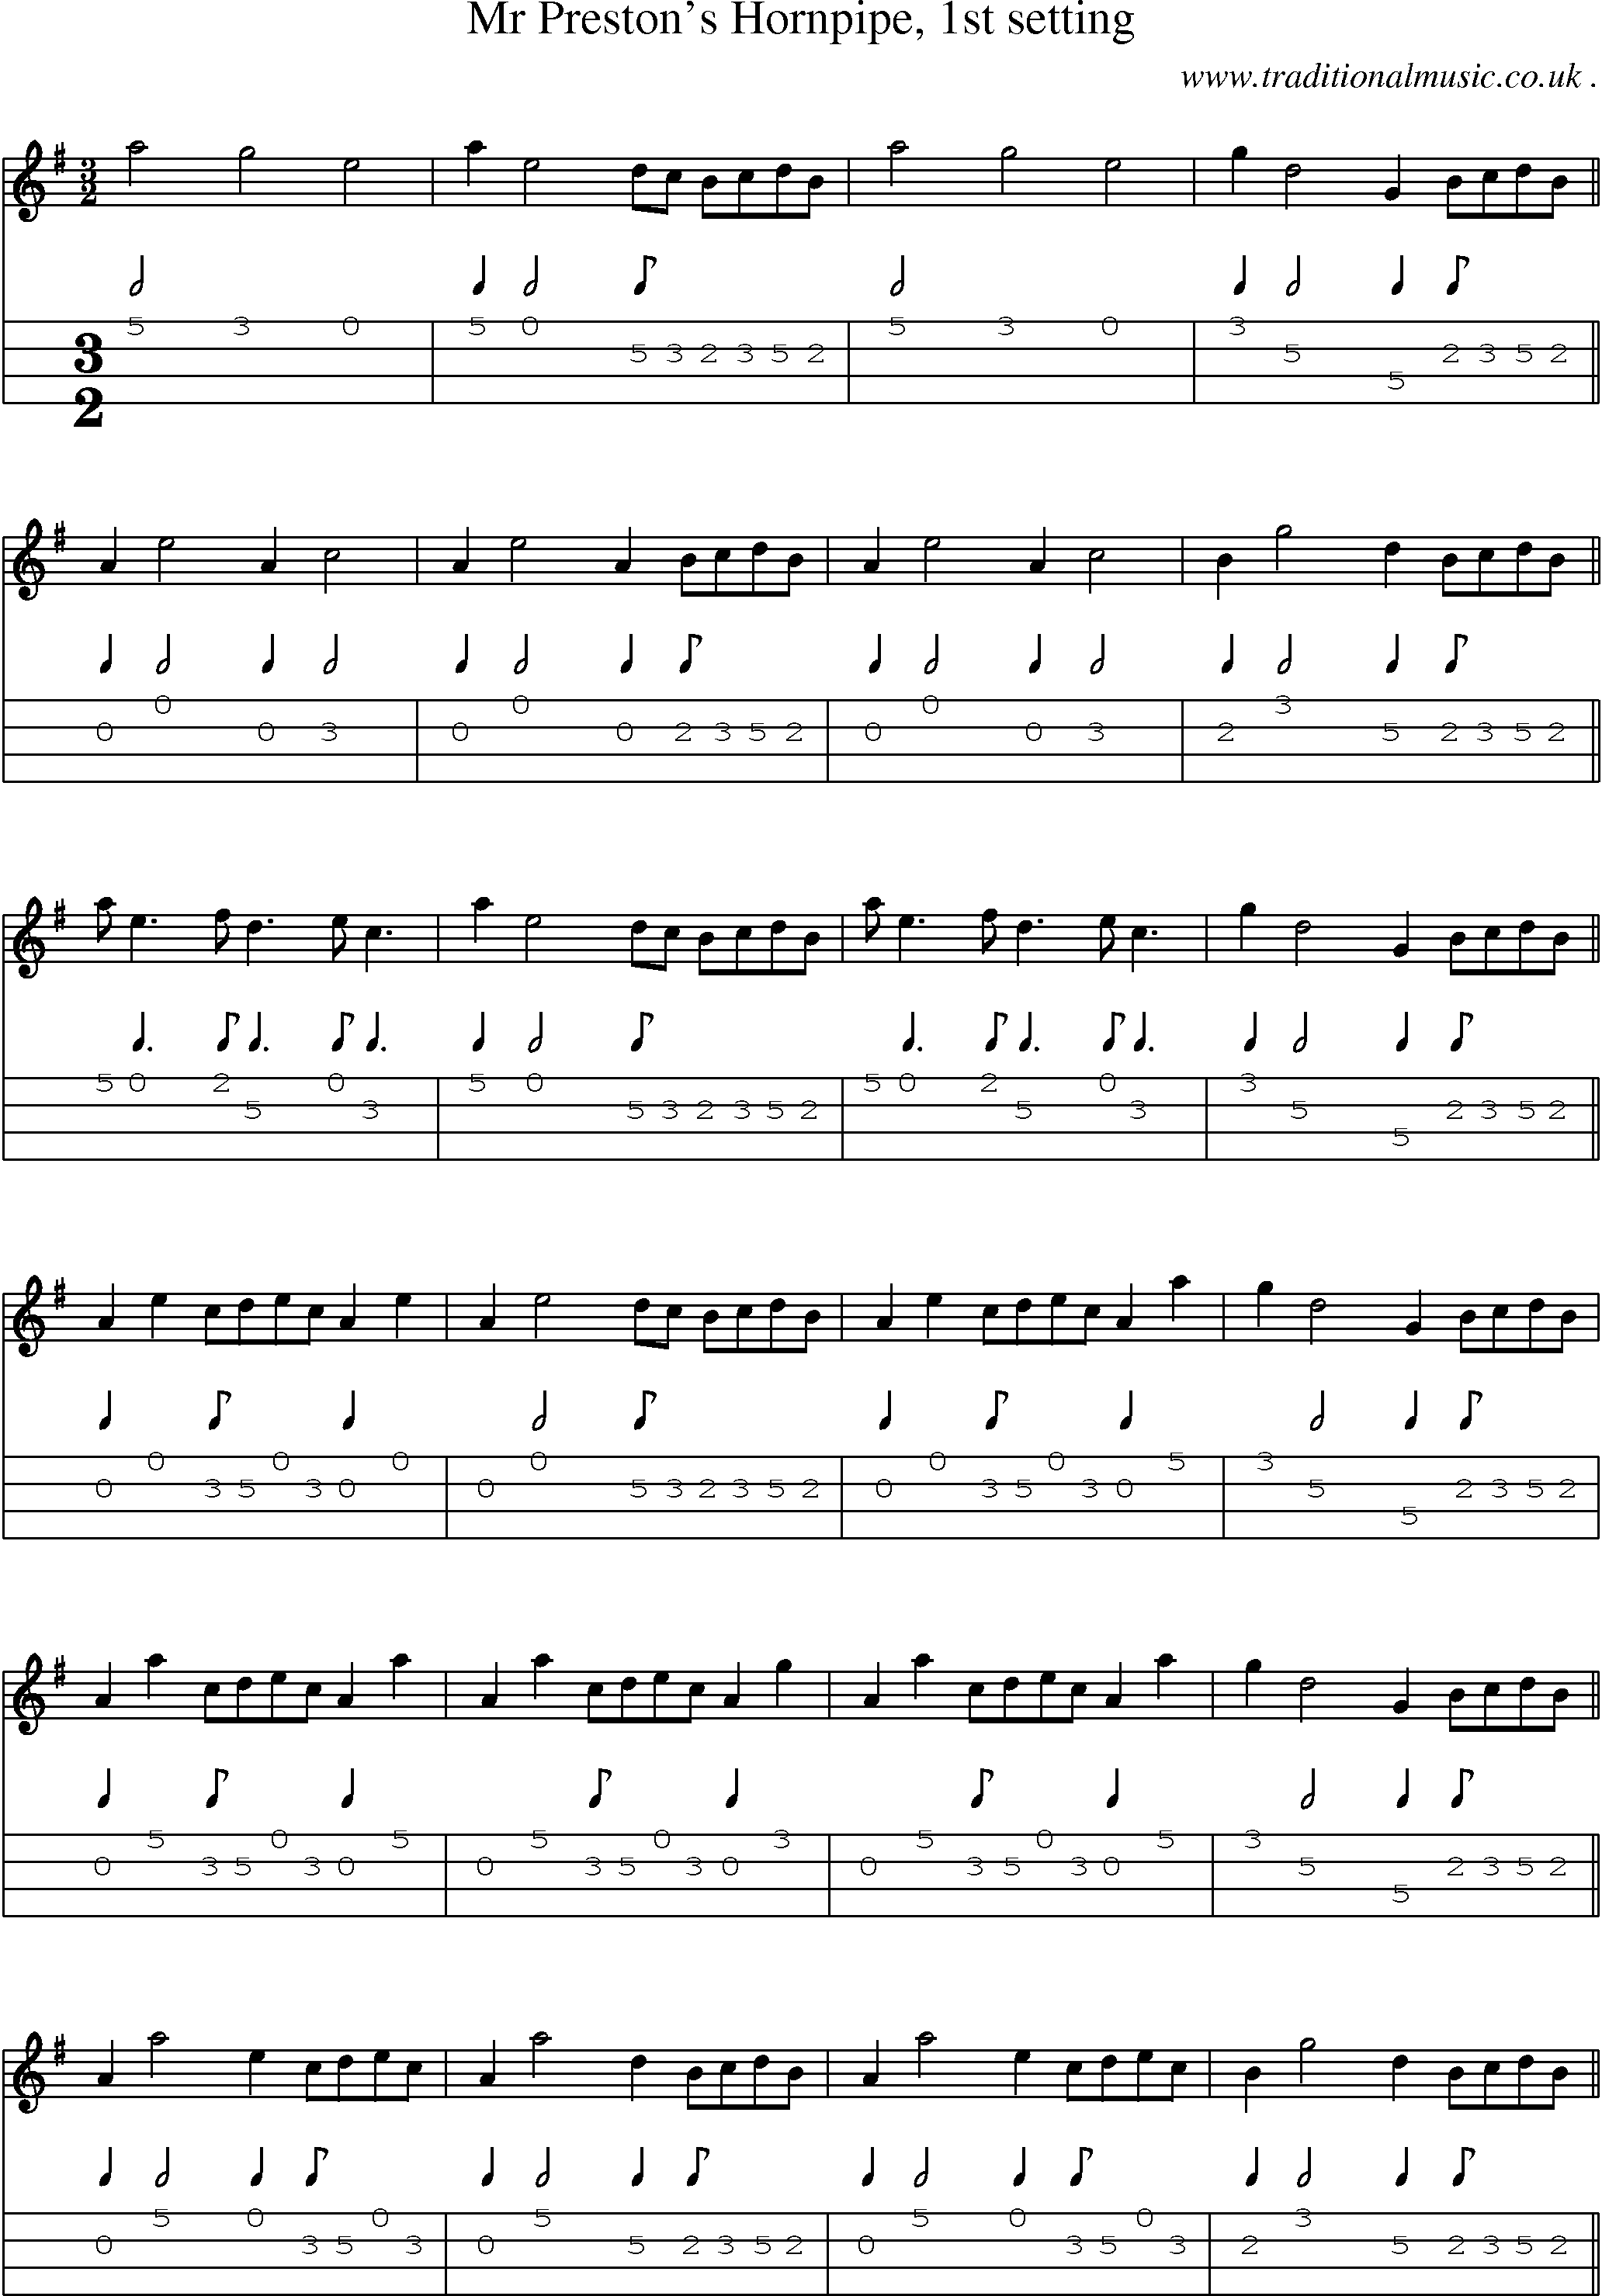 Sheet-Music and Mandolin Tabs for Mr Prestons Hornpipe 1st Setting